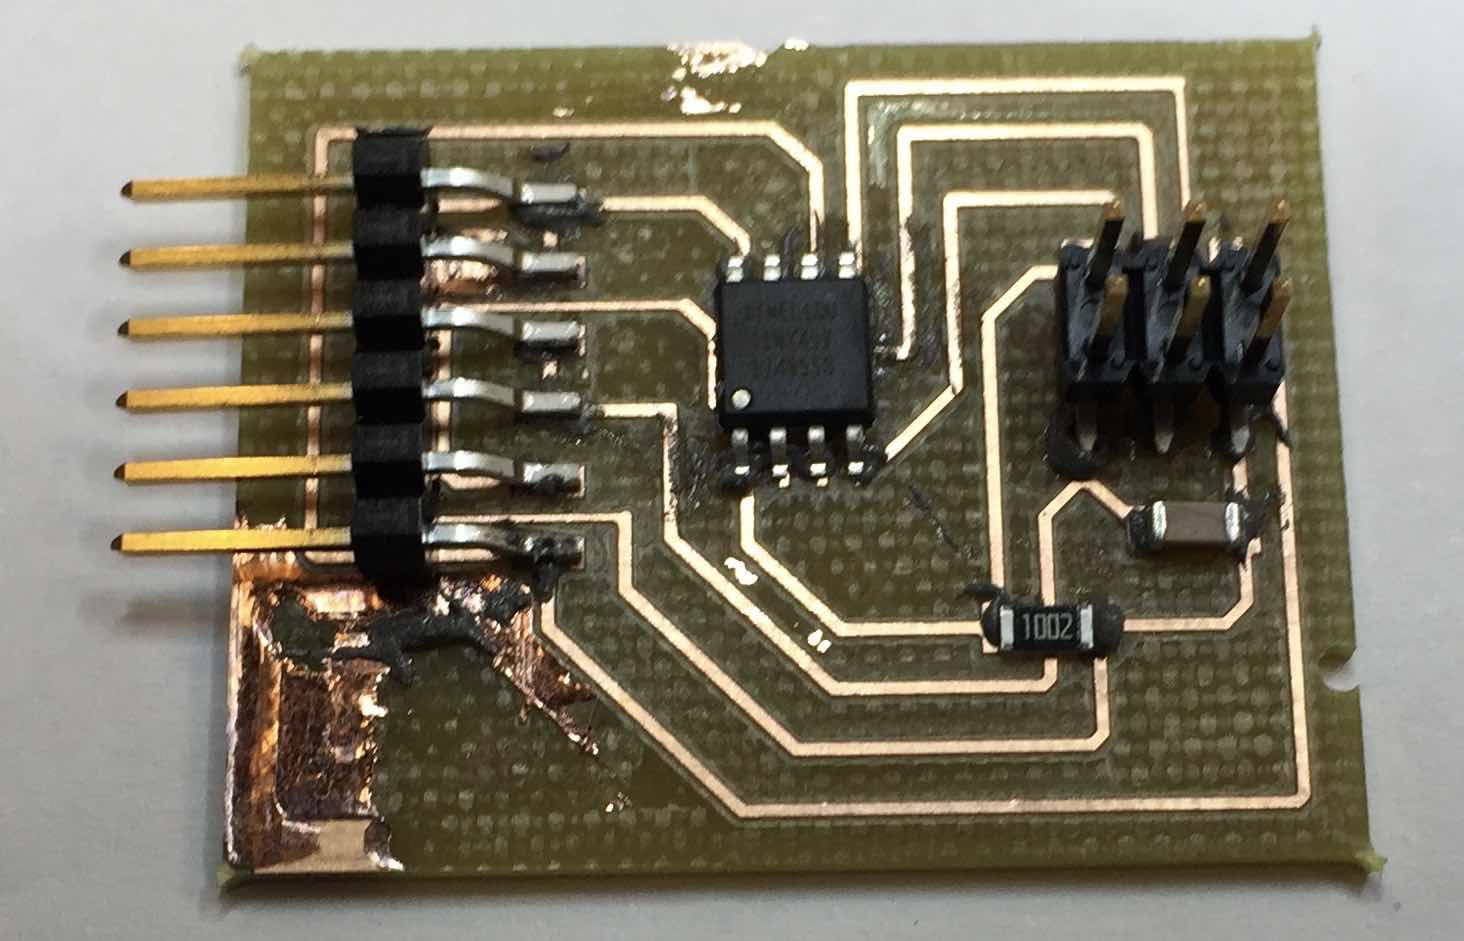 Board with paste